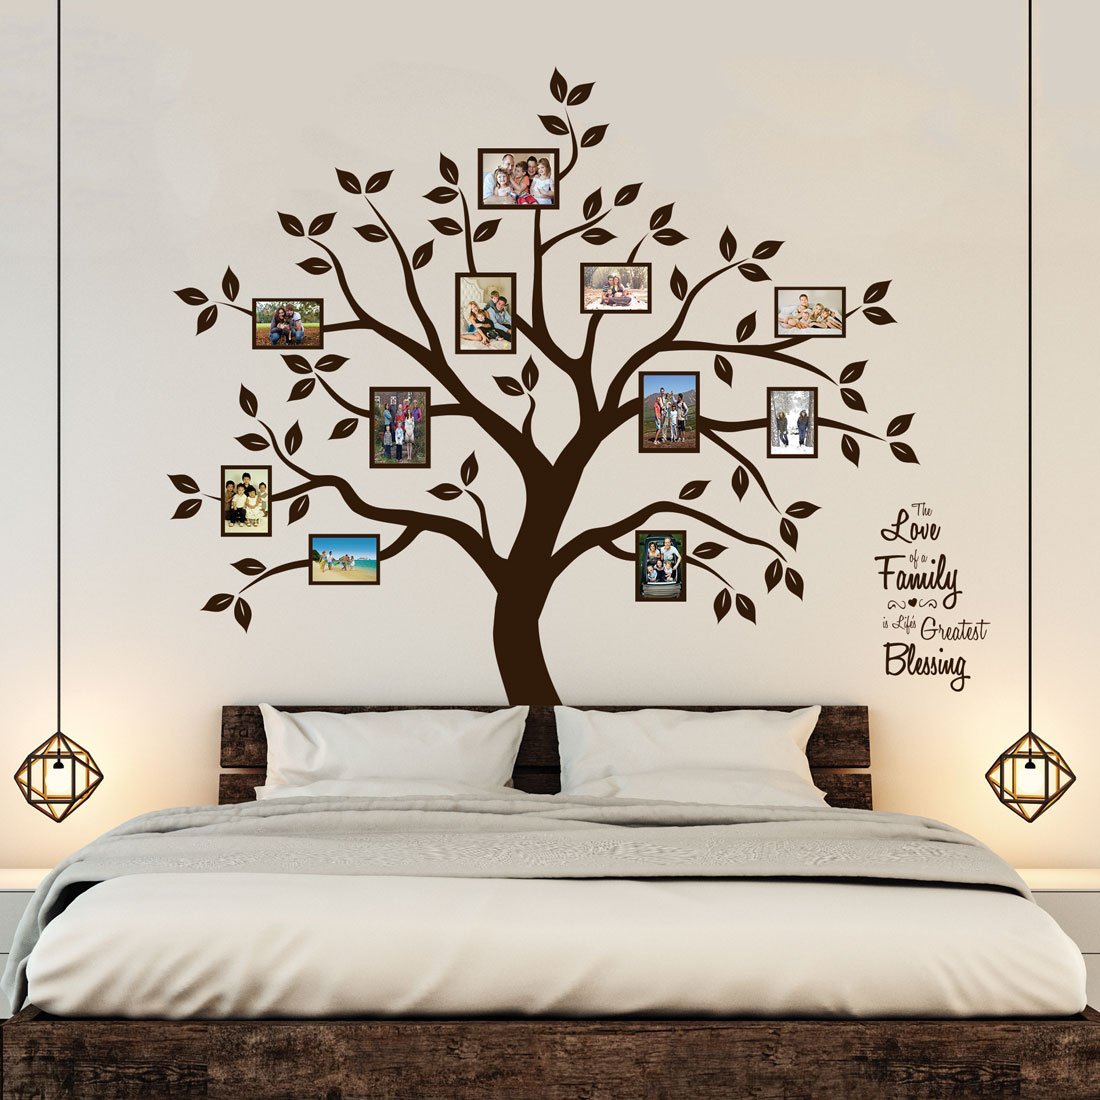 Timber Artbox Beautiful Family Tree Wall Decal with Quote - The Only Décor You Need for Living Room & Bedroom